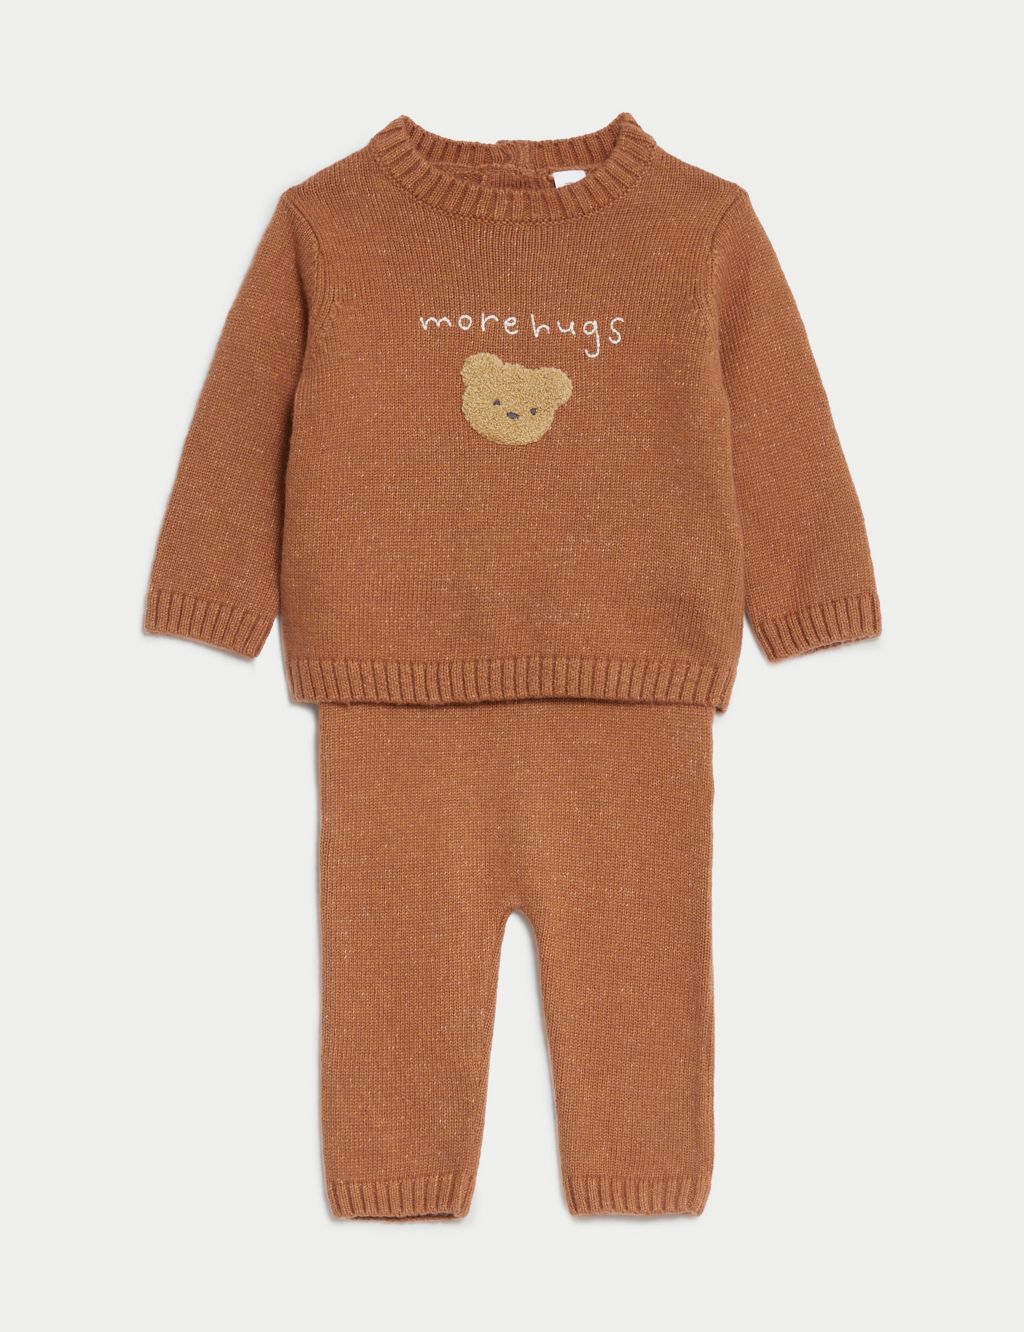 2pc Cotton Rich Knitted Bear Outfit (7lbs-1 Yr) image 2